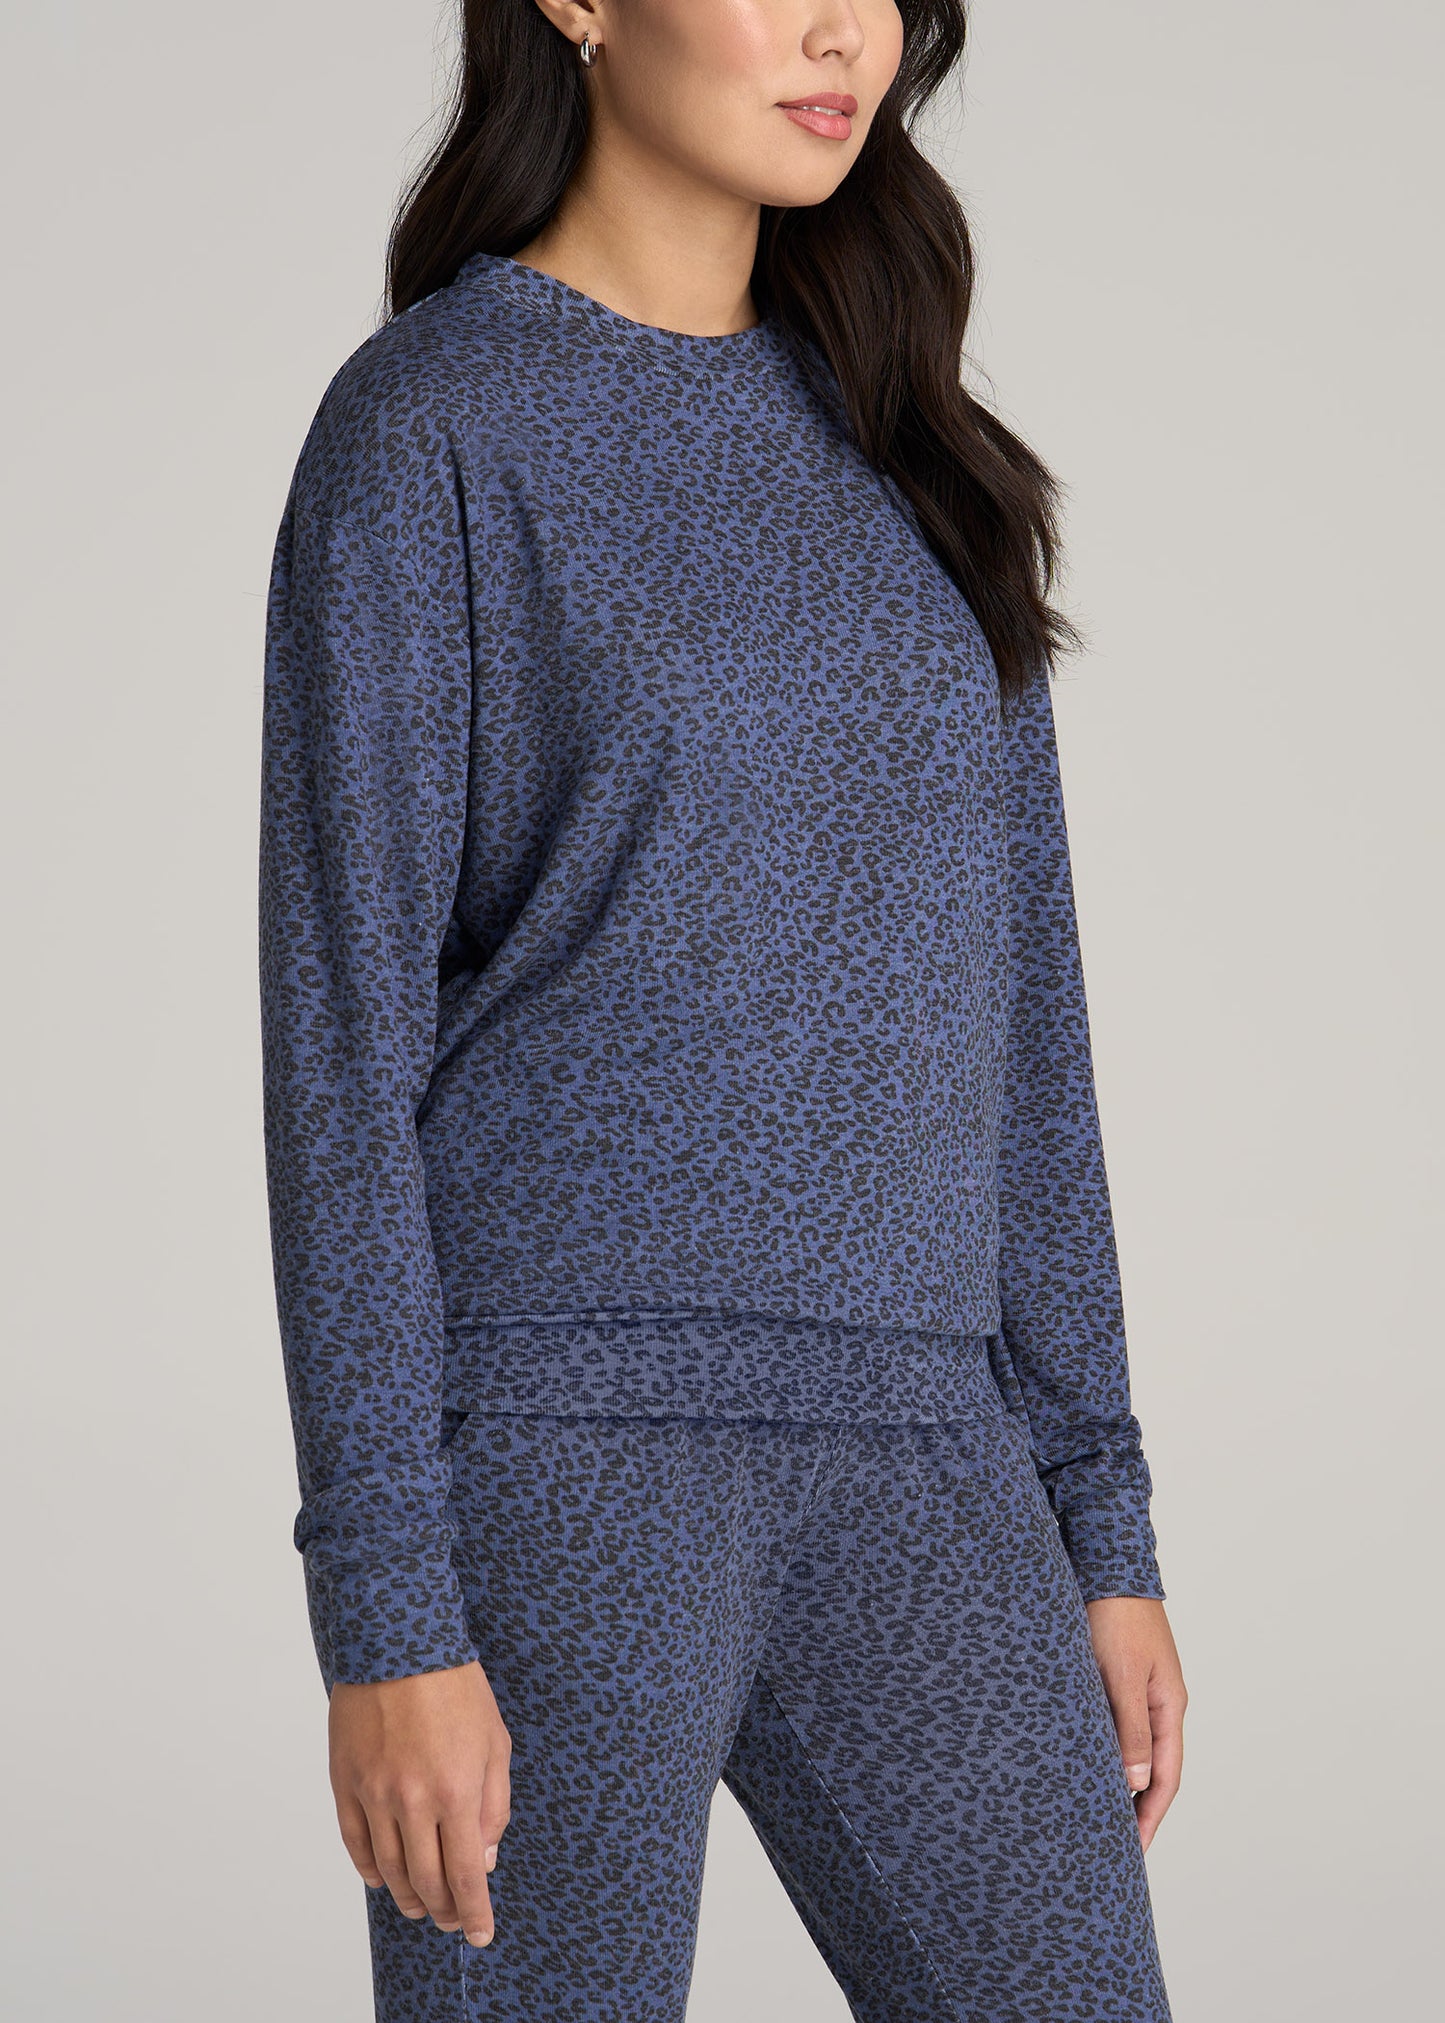 Cozy Lounge Crewneck in Navy Leopard - Tall Women's Shirts